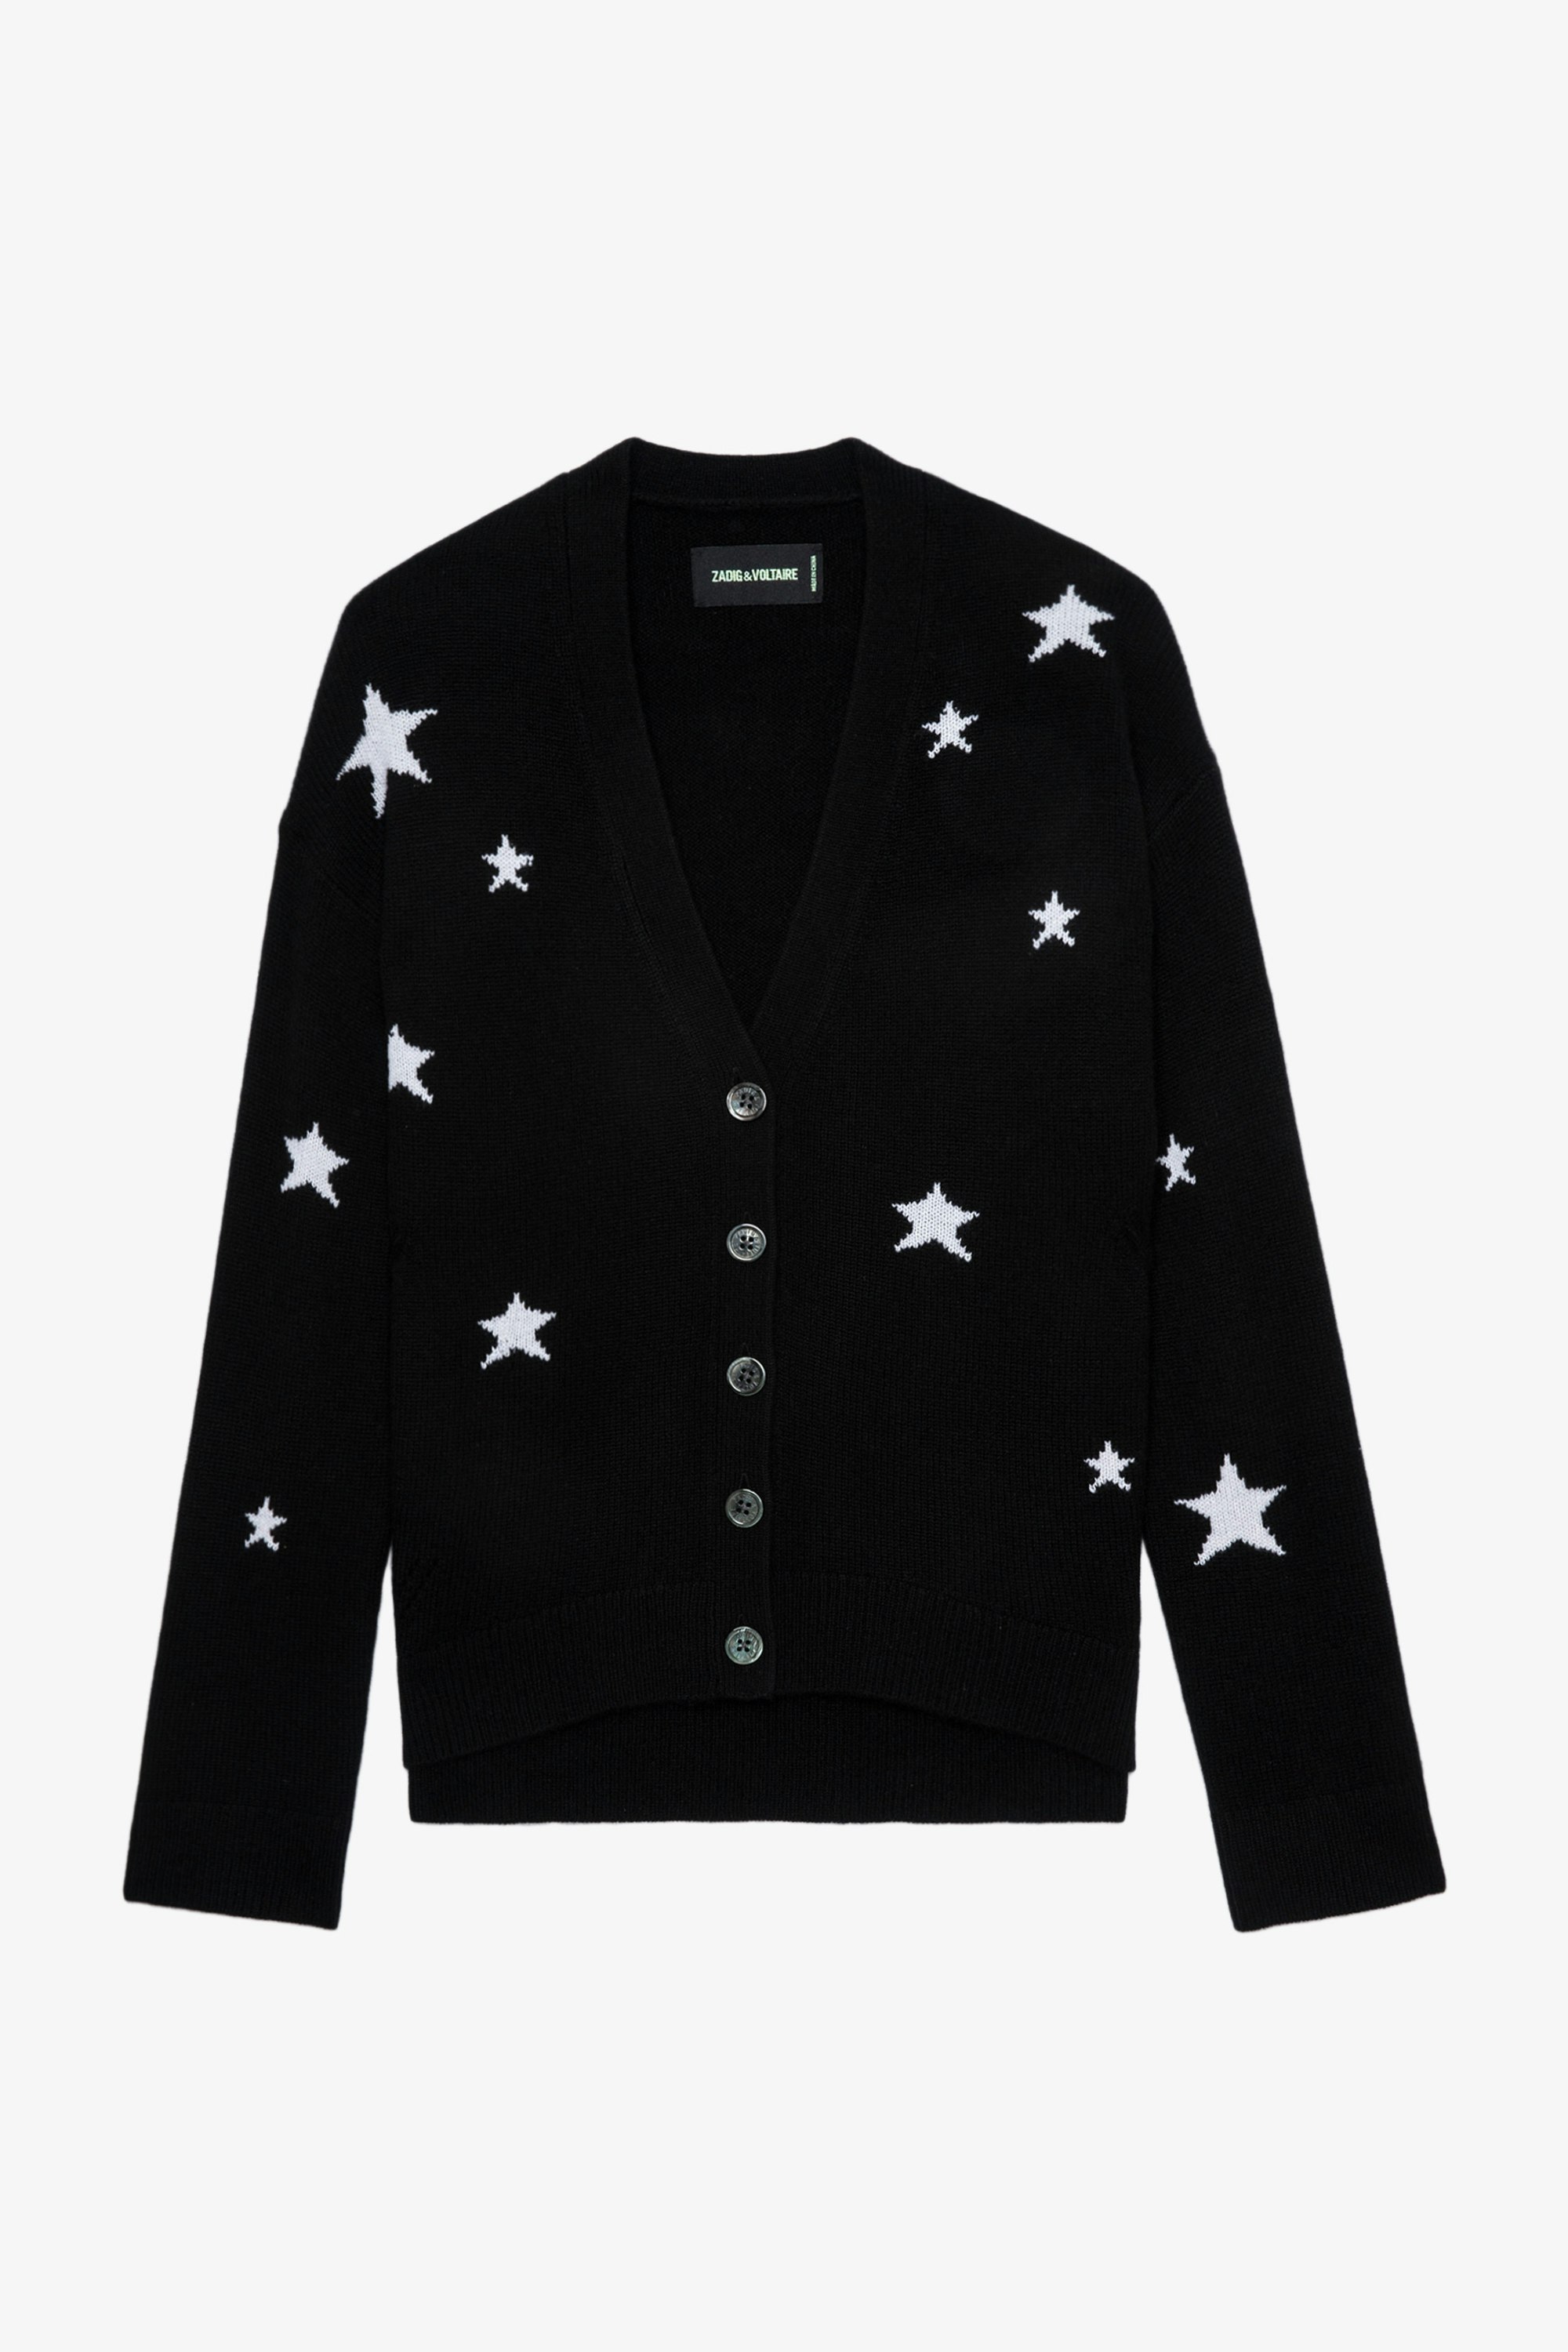 Mirka Stars Cashmere Cardigan - Women’s black cashmere button front cardigan with contrasting star motifs